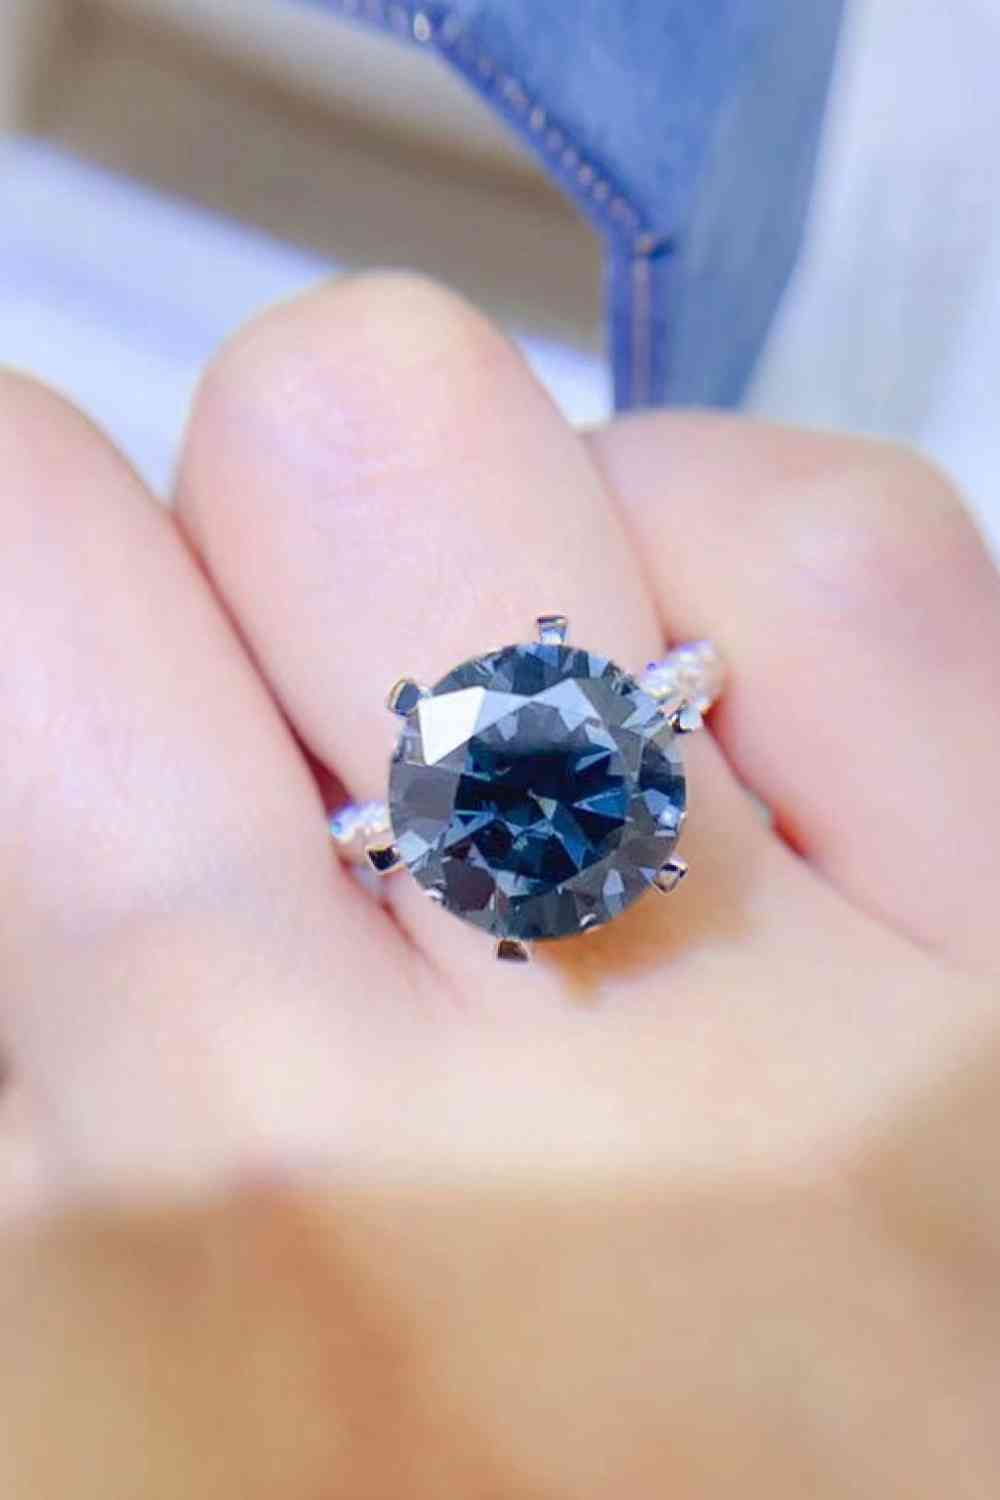 a close up of a person's hand holding a ring with a blue diamond